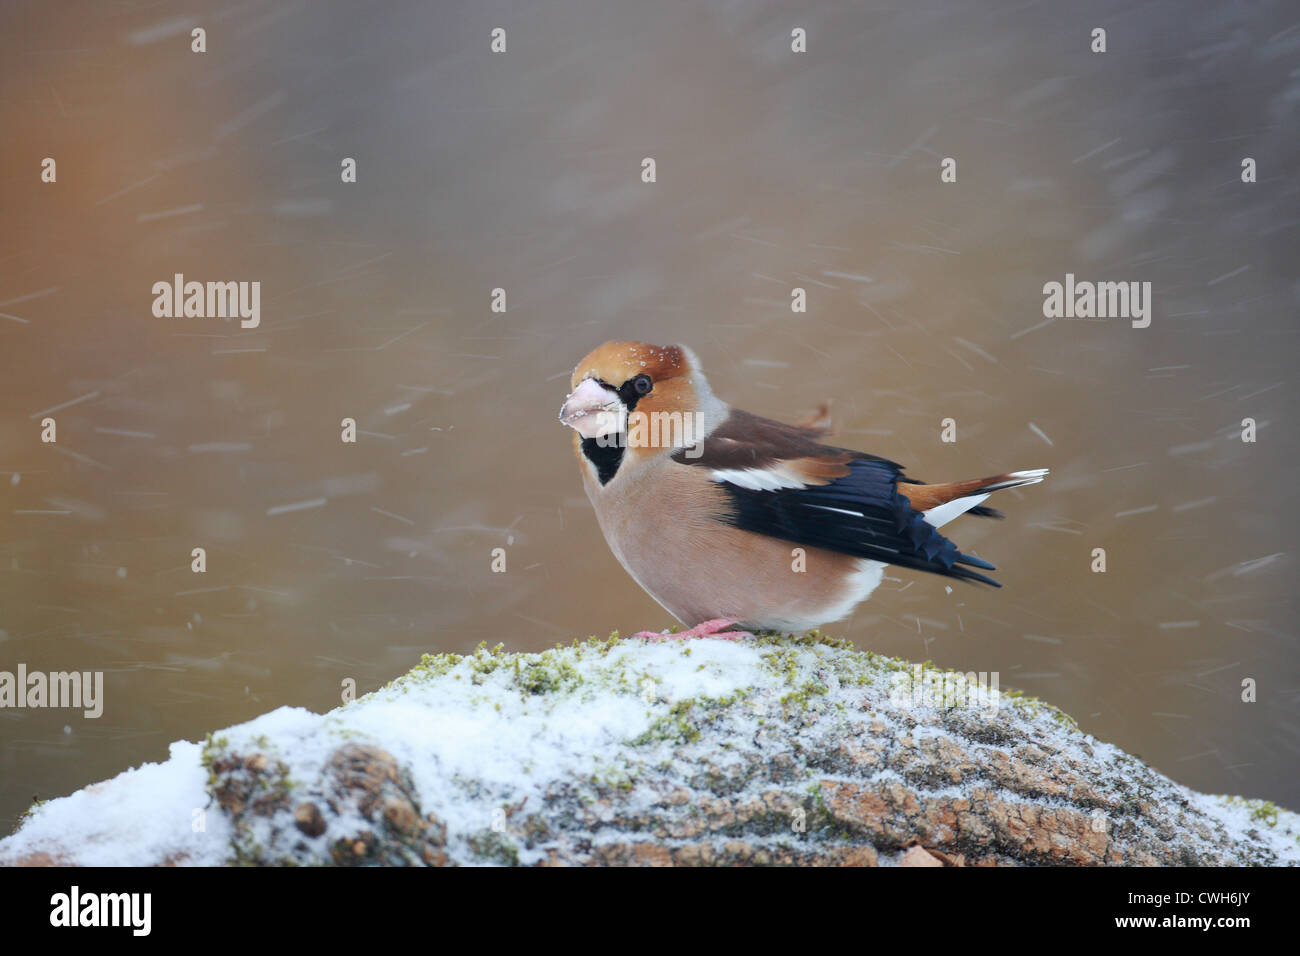 Hawfinch /Coccothraustes coccothraustes/ Stock Photo